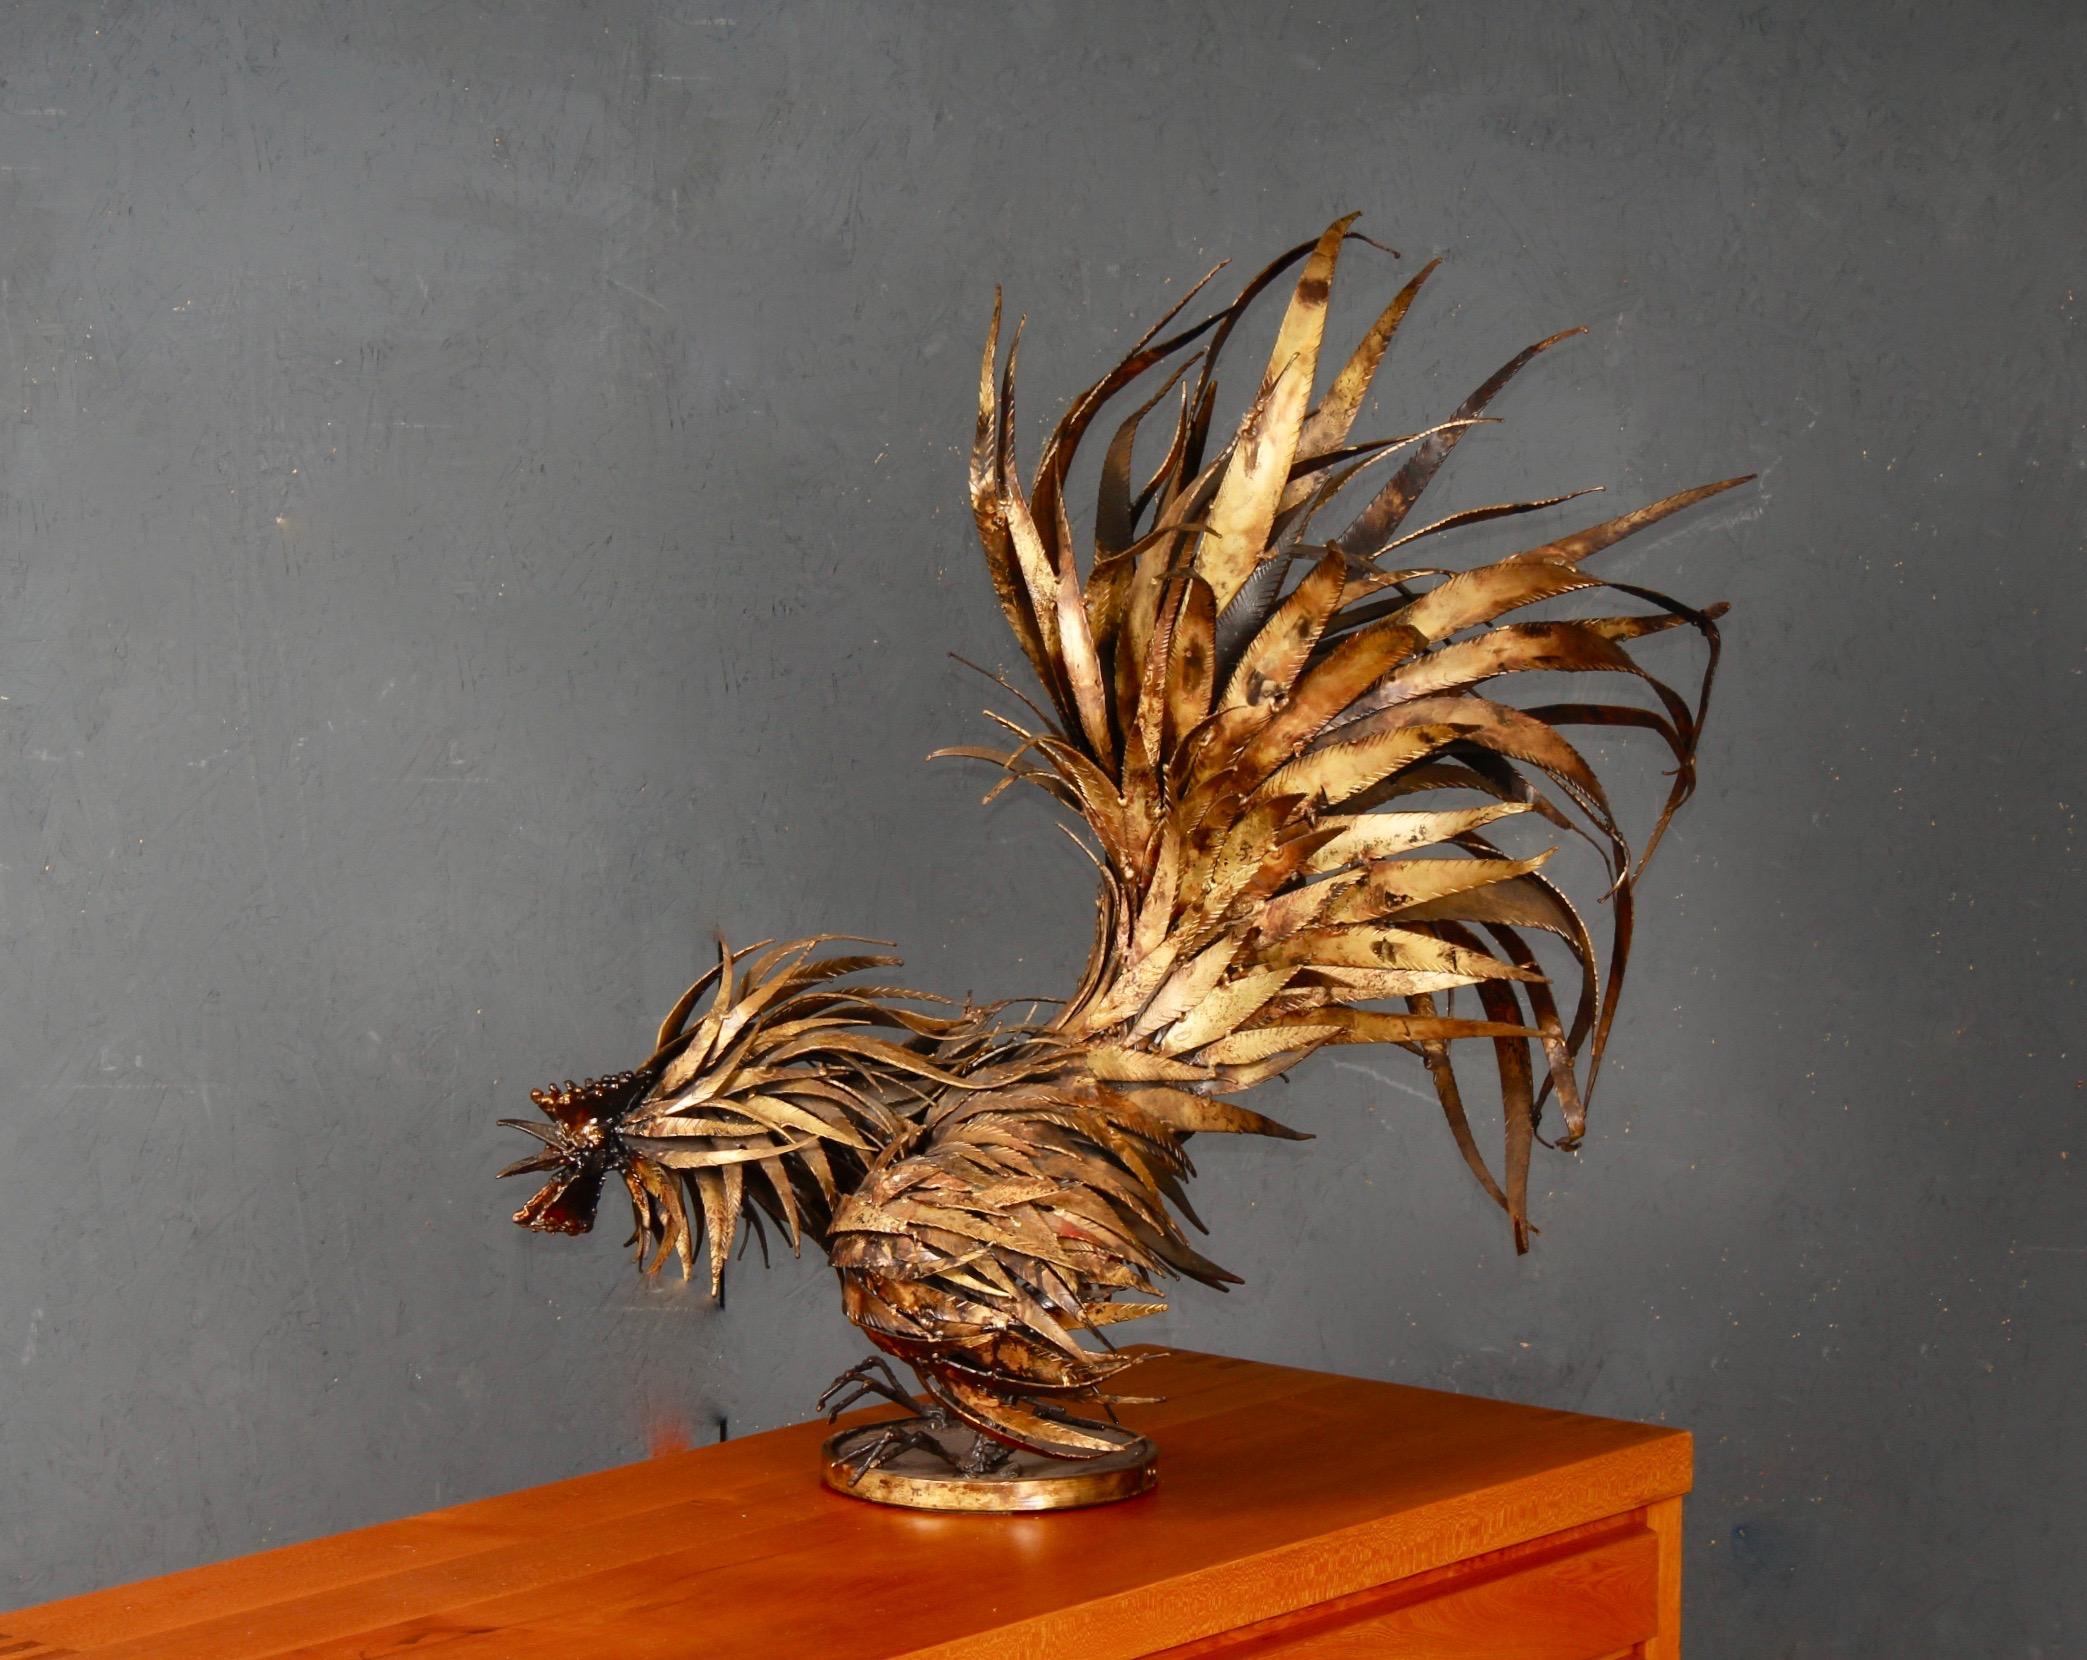 Big metallic rooster sculpture. The feathers seem like they are in movement which brings dynamic to the sculpture making it look almost alive.
Unknown artist but most probably European.